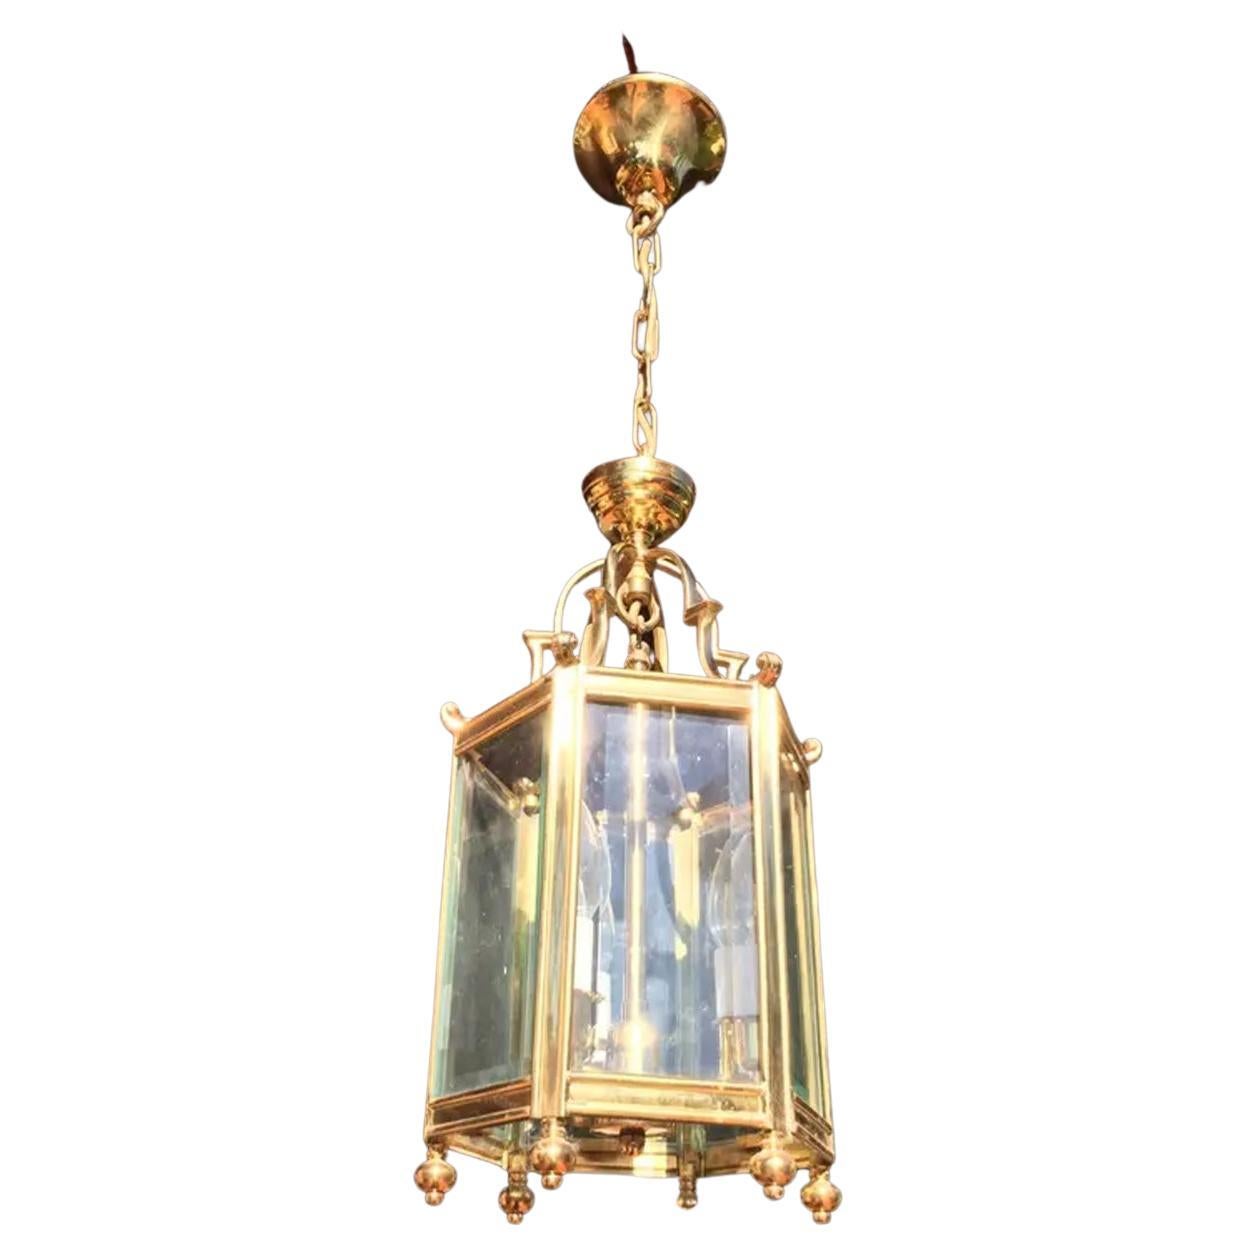 This original 20th century is perfect for lighting in an entrance, hall, covered porch or anywhere in the house.

It is in perfect condition, 

Six glass faces

Measures: 66cm x 23cm x 23cm (80cm total).

 Elegant brass lantern with three lights
It